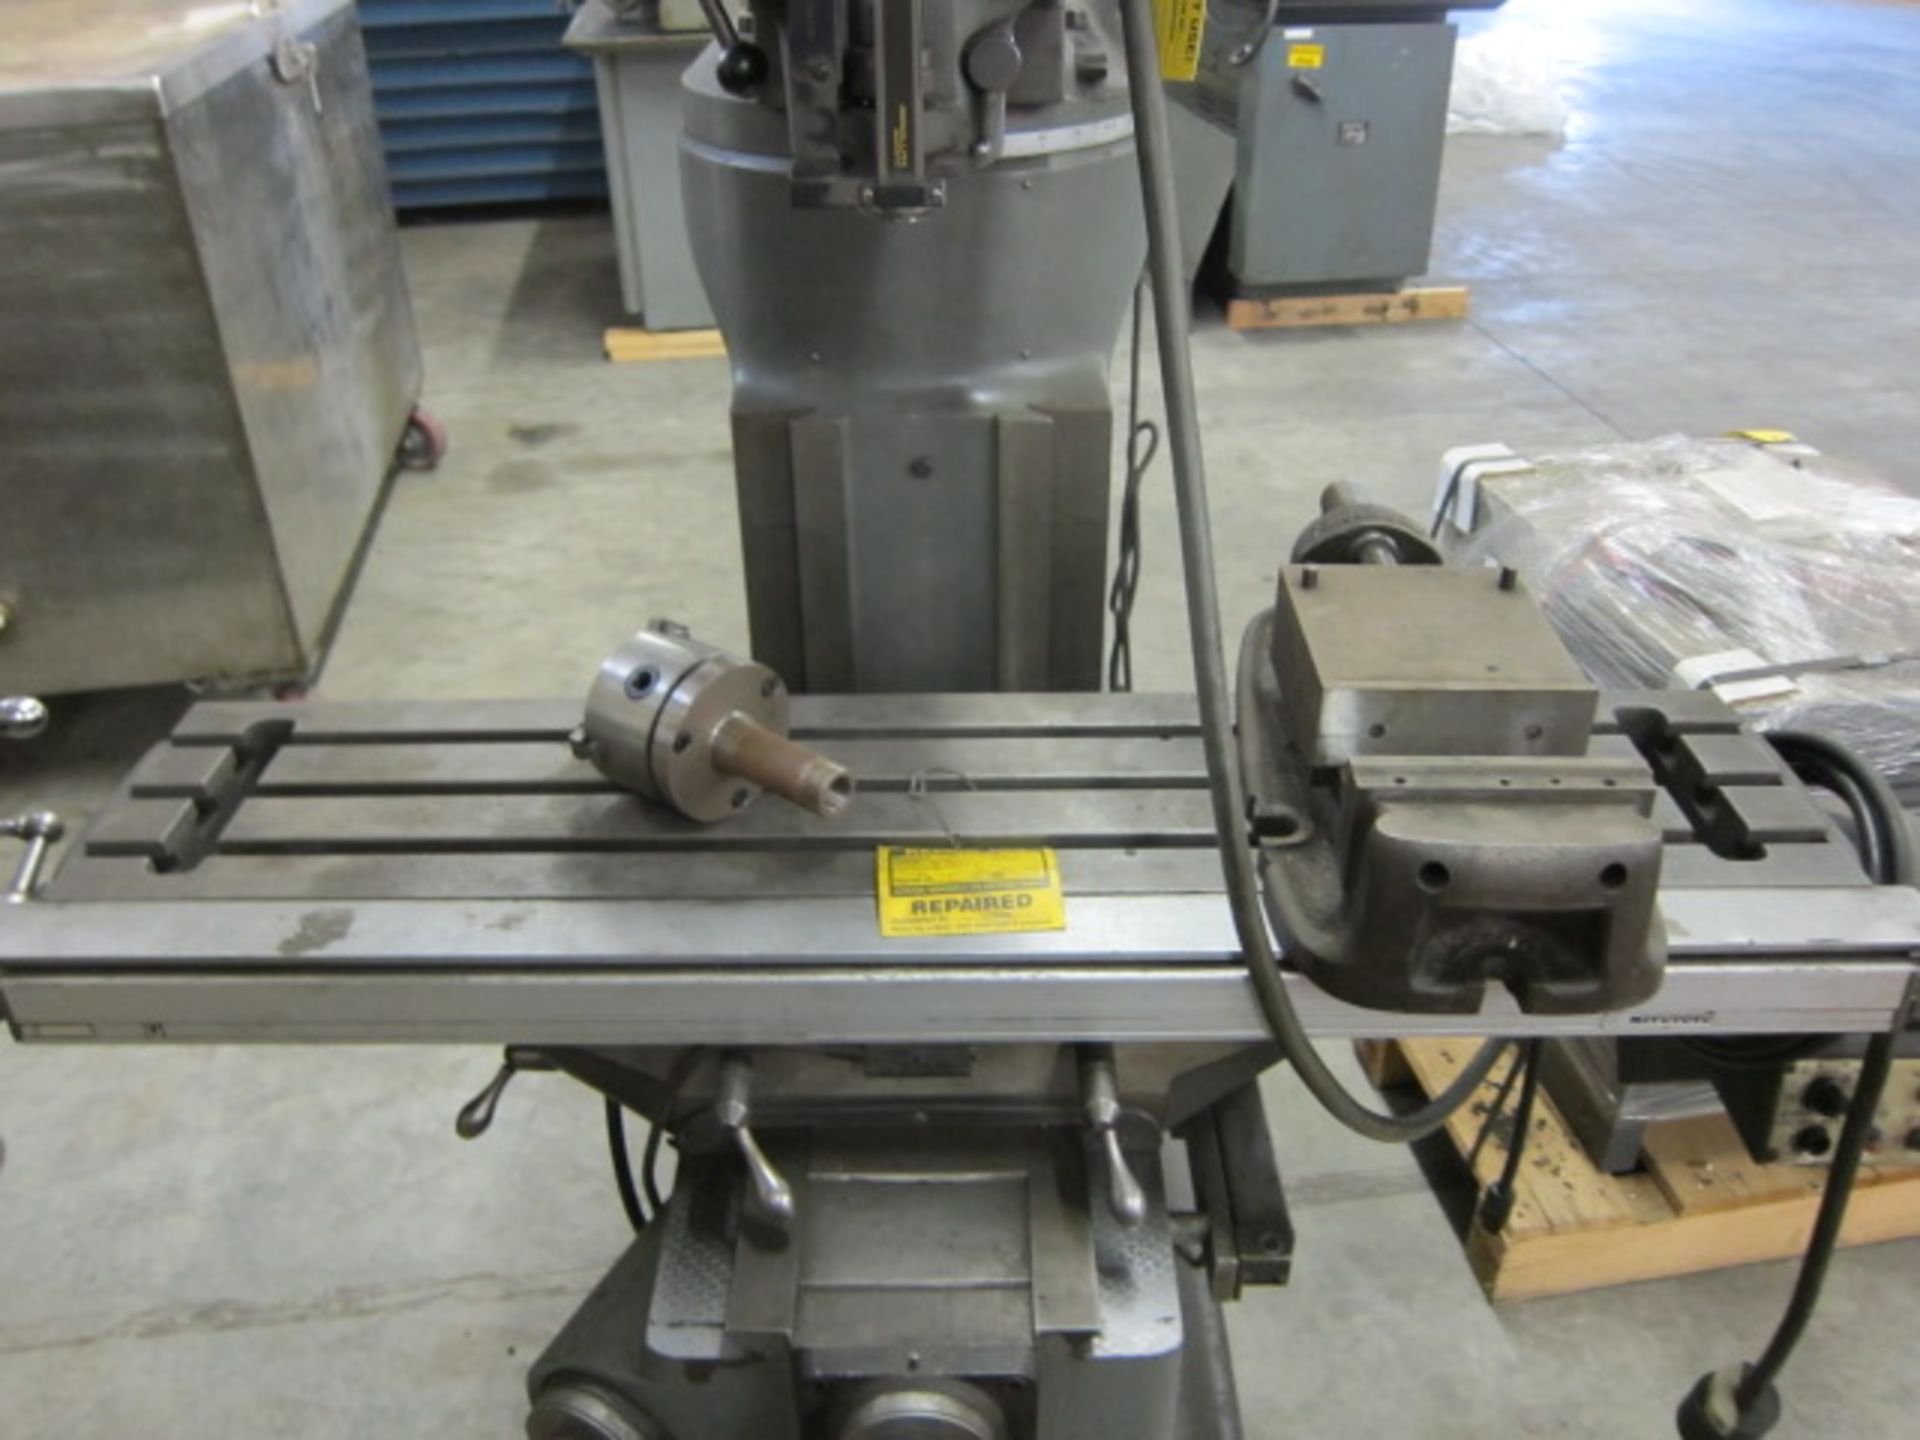 VERTICAL MILL BRIDGEPORT, 1 HP, 42" x 9" table, rapid traverse Mitutoyo readout, S/N 243550 (Sold by - Image 3 of 4